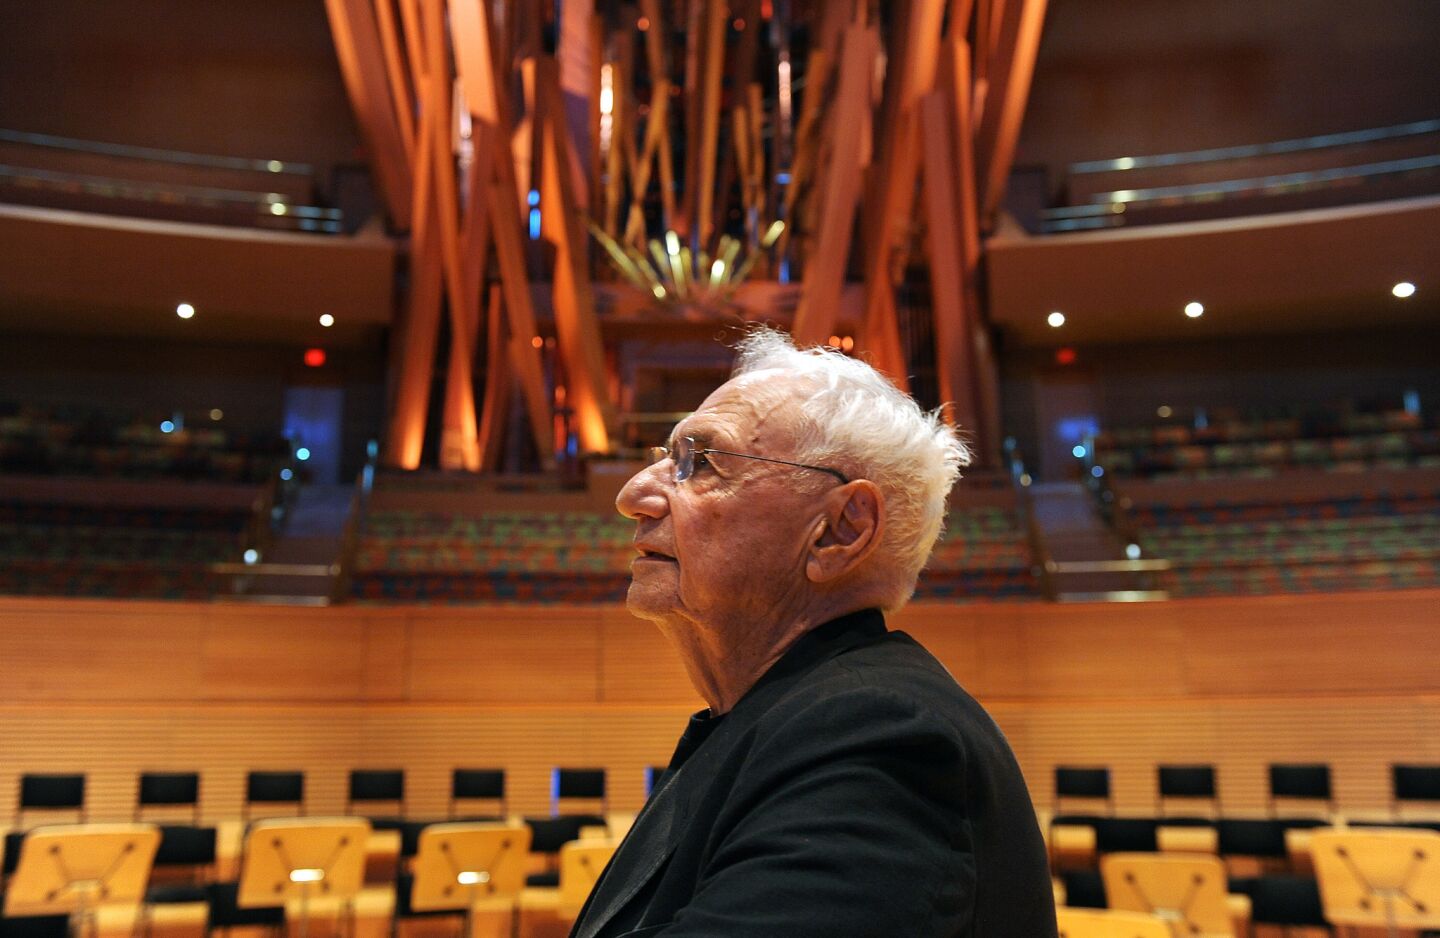 Architect Frank Gehry stands inside Walt Disney Concert Hall, a structure he designed, in downtown Los Angeles.